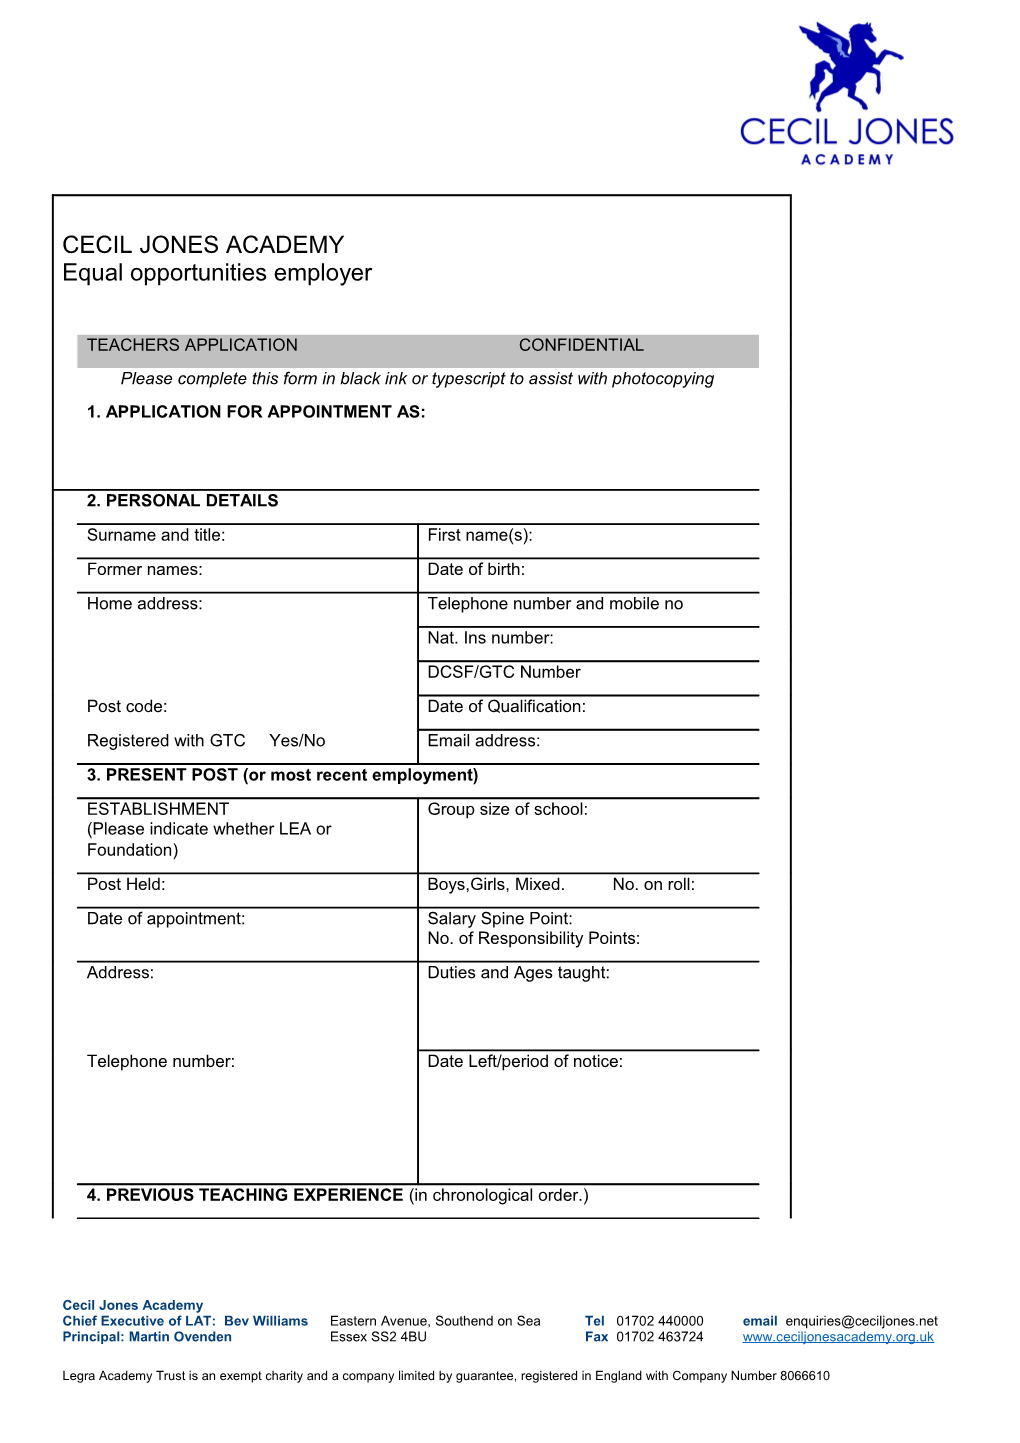 Please Complete This Form in Black Ink Or Typescript to Assist with Photocopying